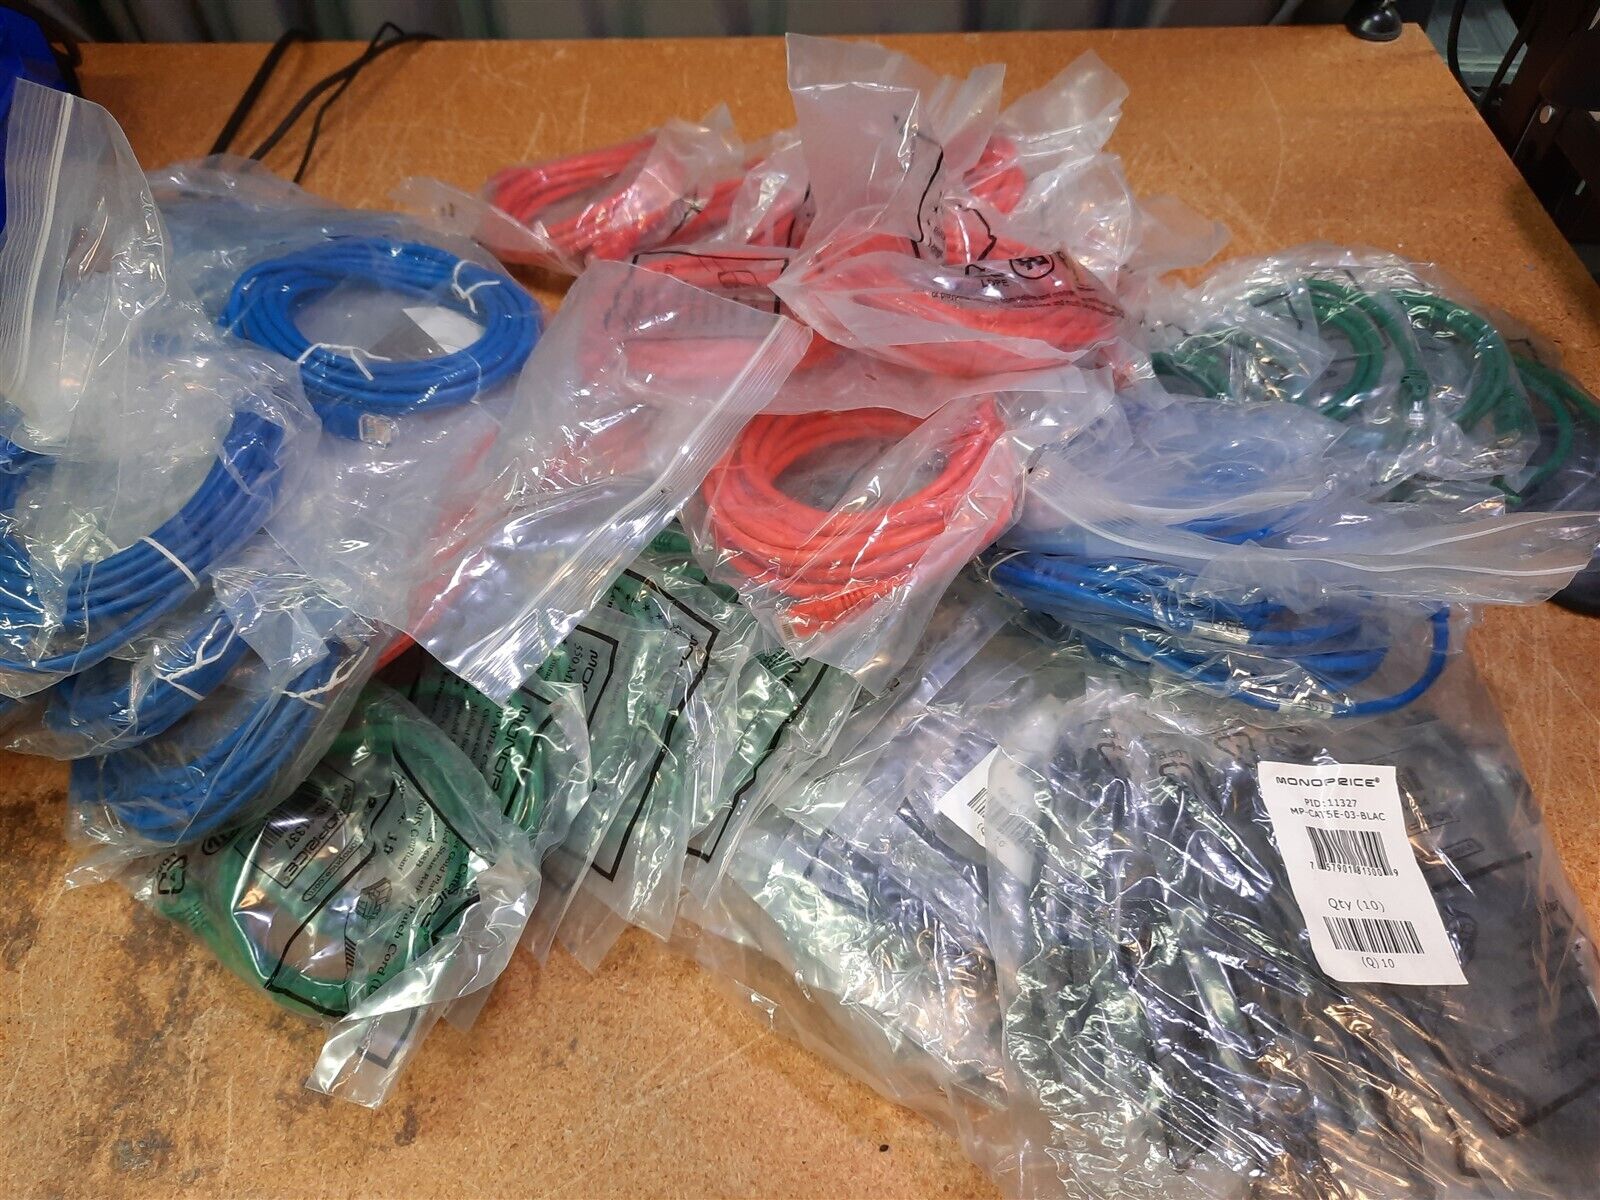 Lot of 61 network patch/Ethernet cables, name brand, all new, sealed Cat 5/Cat 6